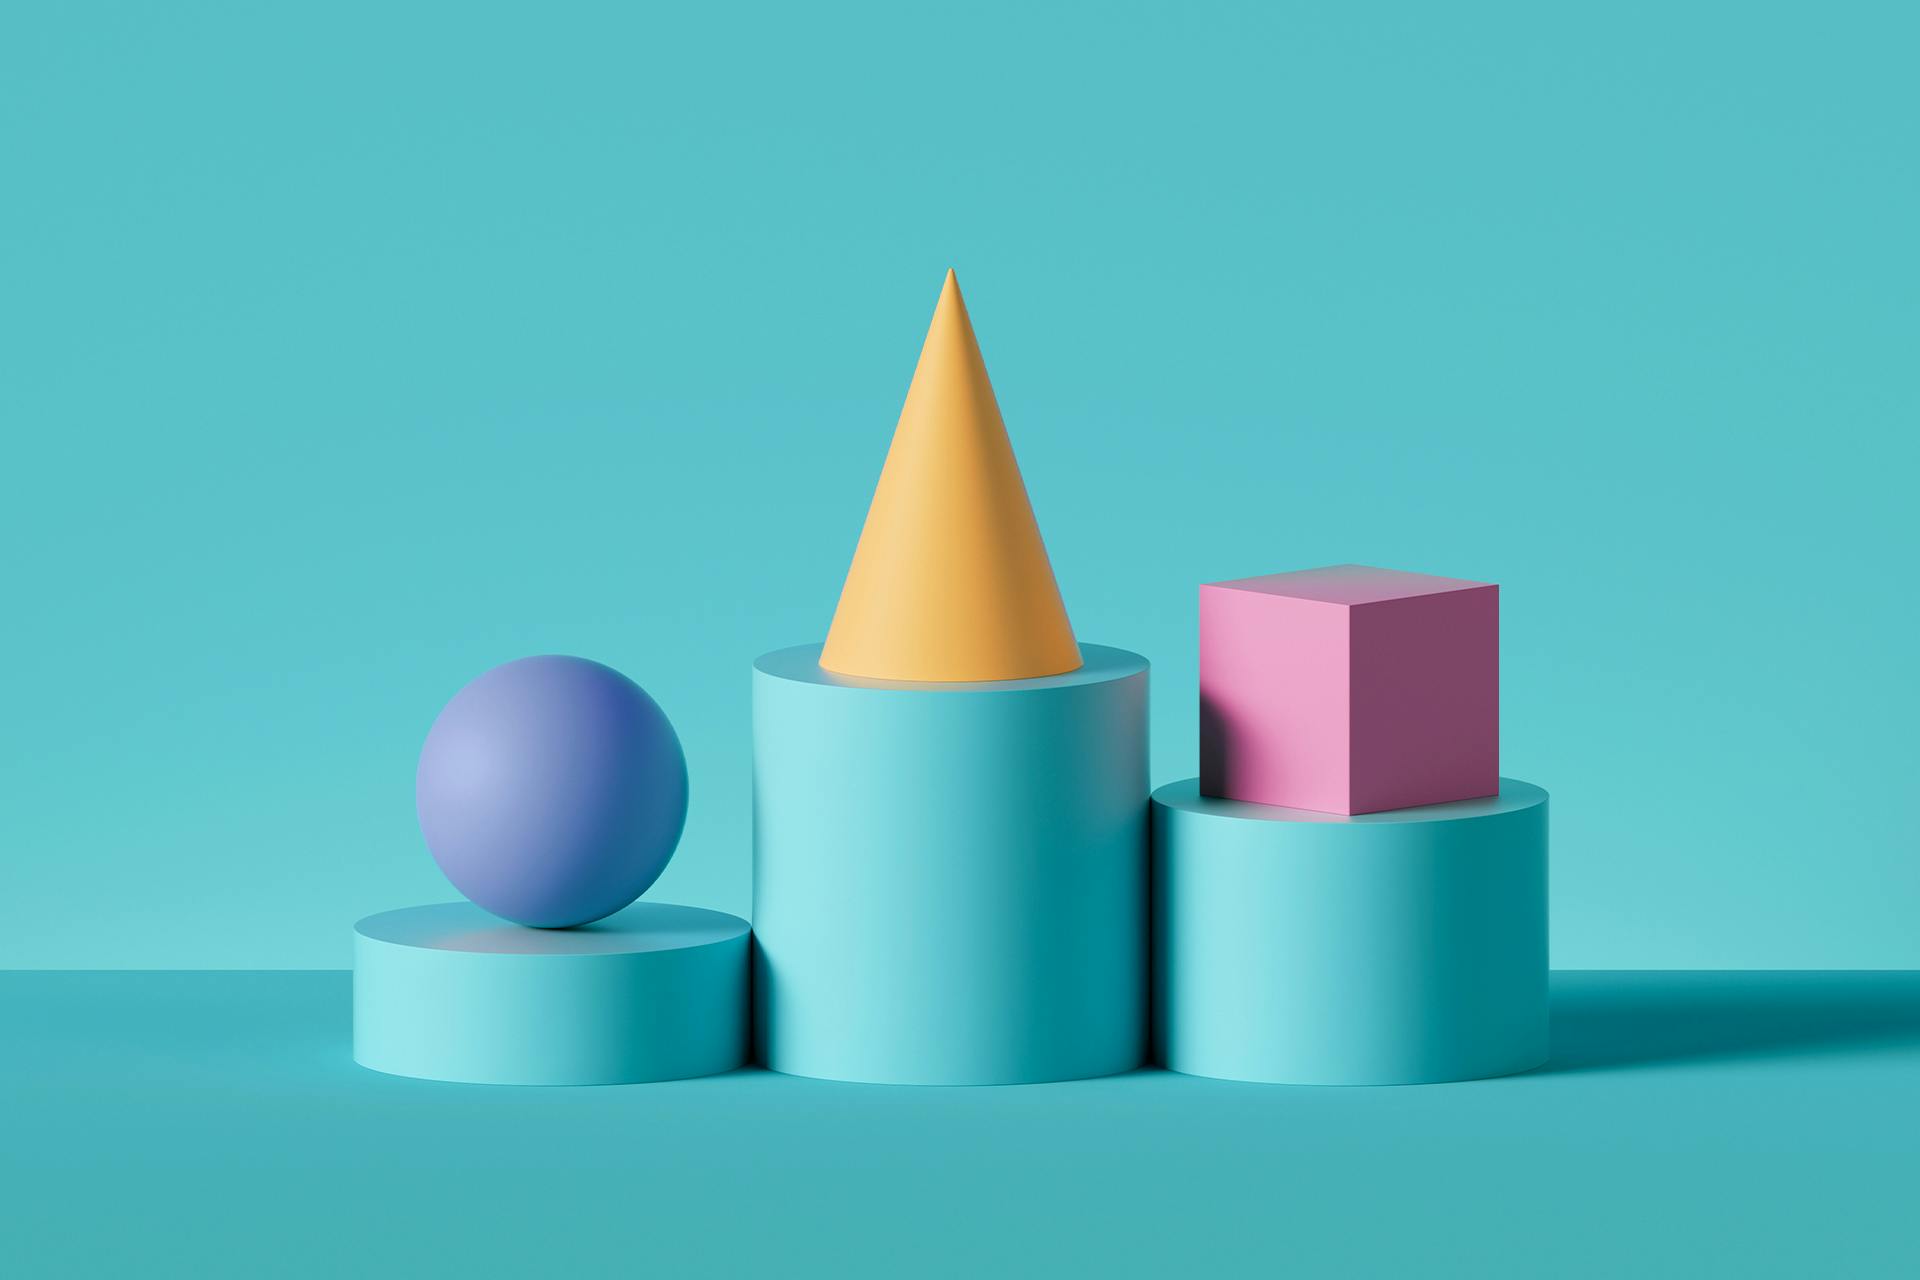 A podium with three different shapes set atop: a sphere, a cone and a square. The different shapes represent the different types of customers explained in this blog.